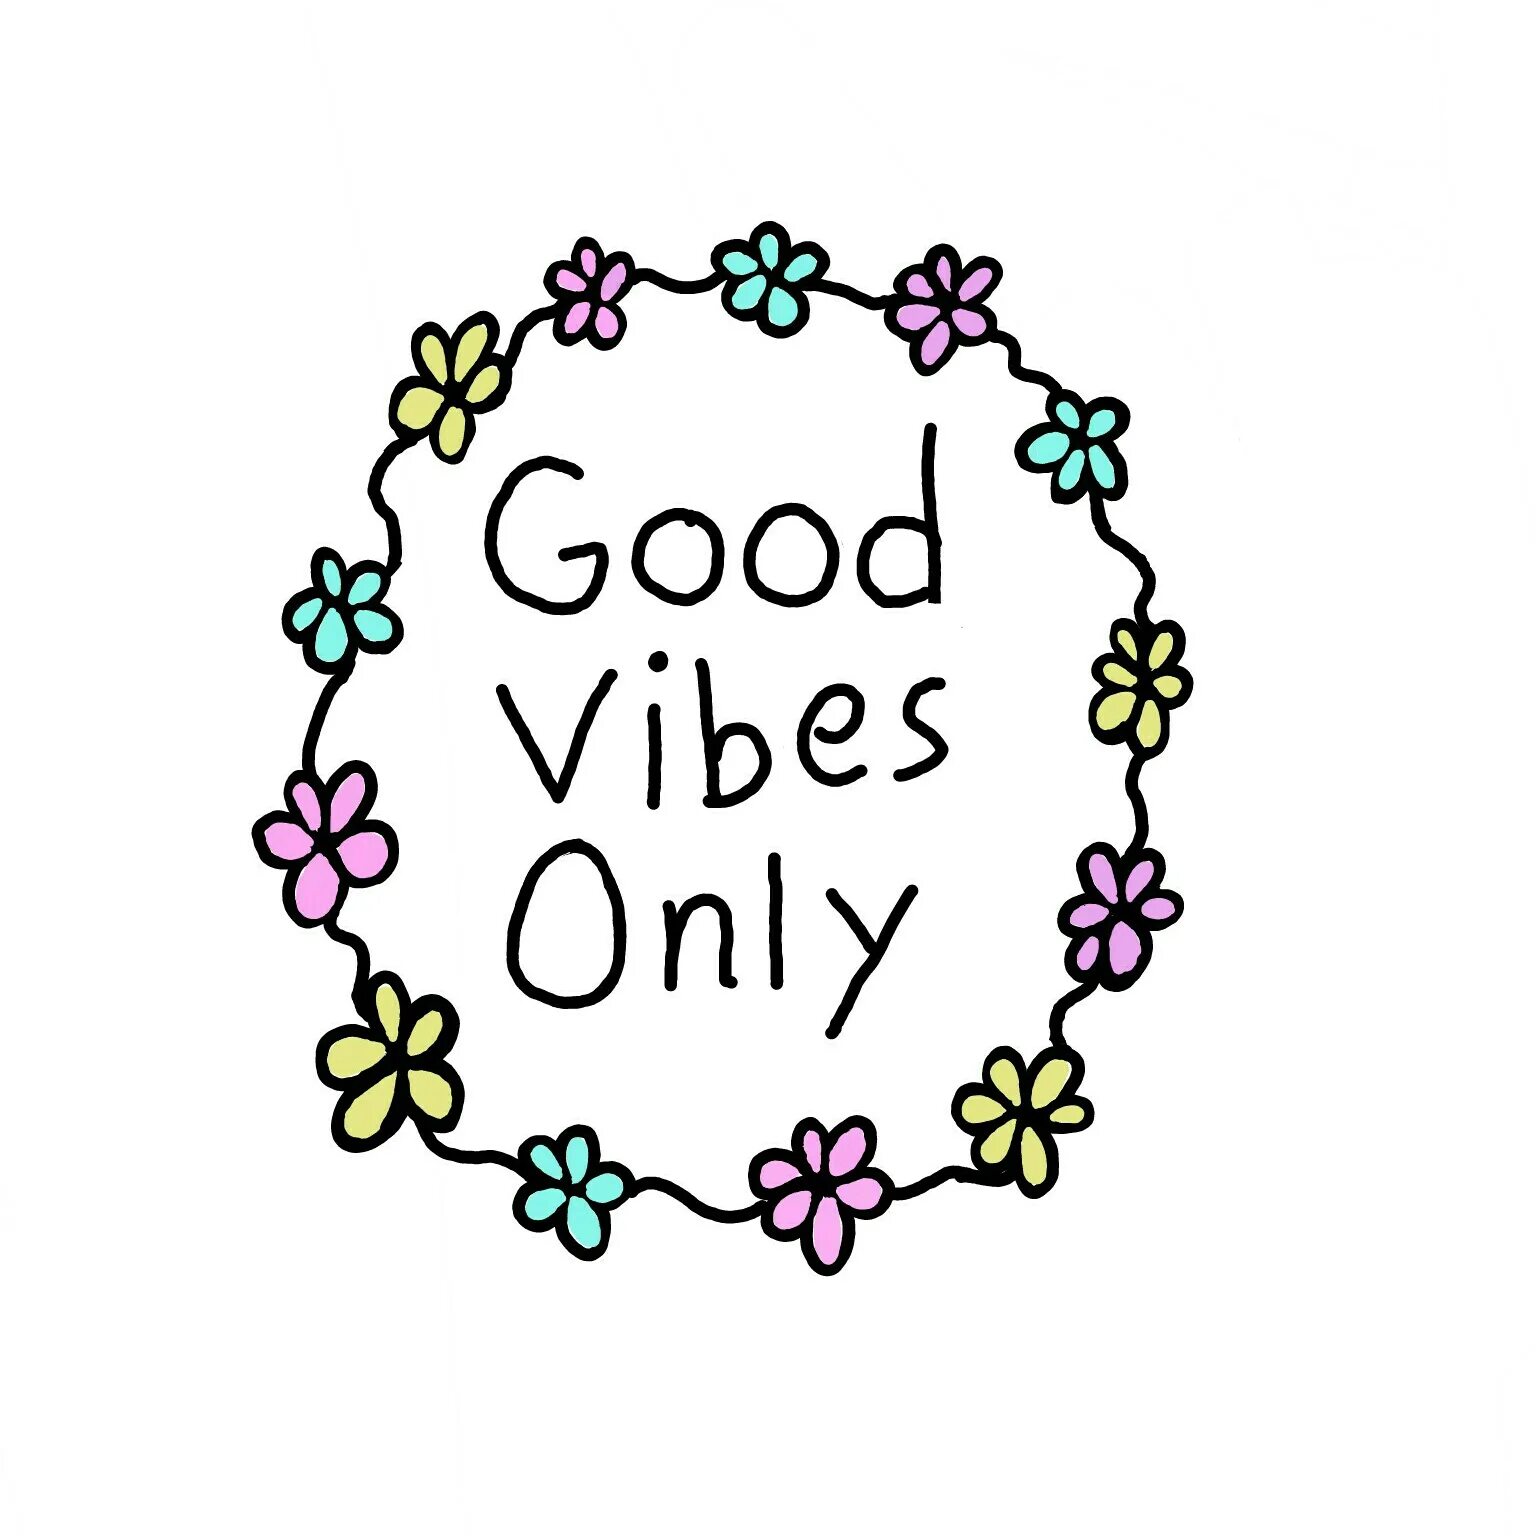 Well vibe. Good Vibes. Good Vibes Love. Good Vibes only обои.